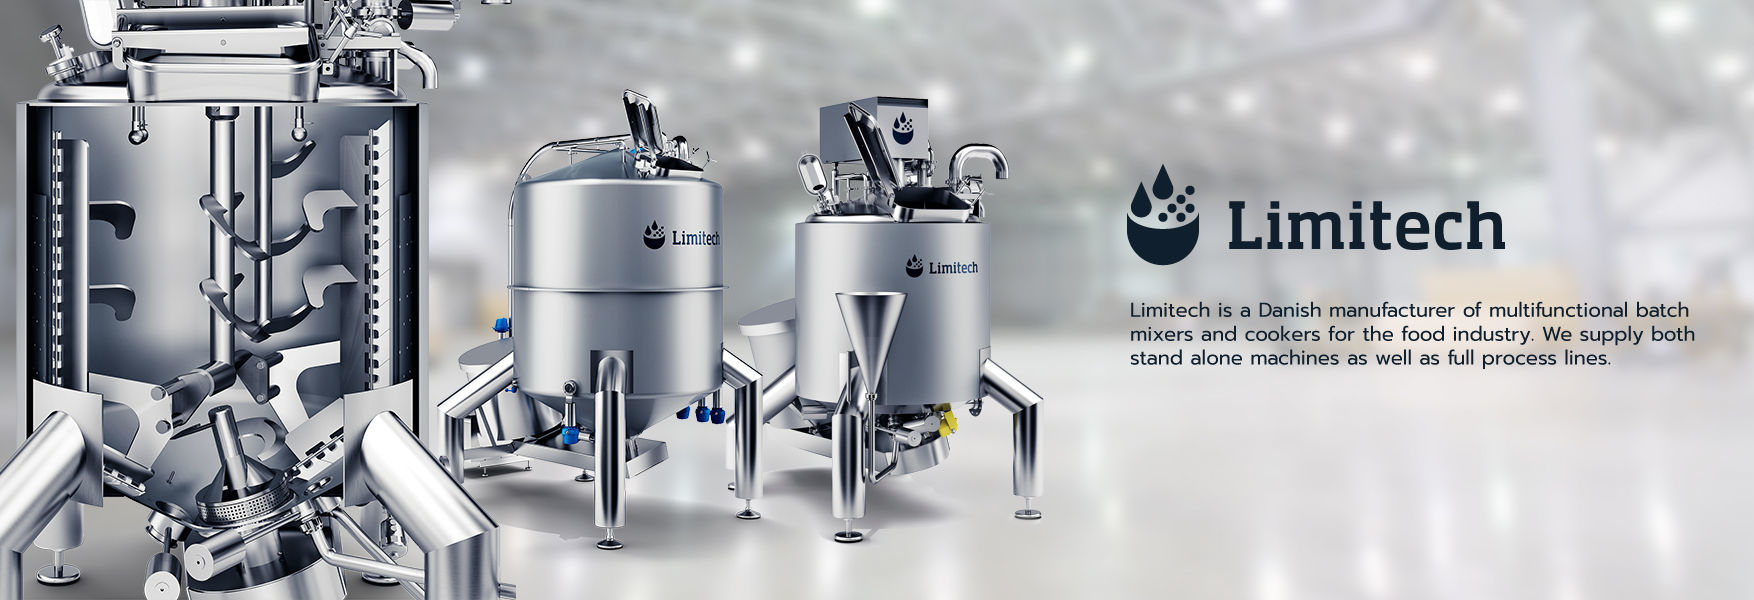 Limitech is a Danish manufacturer of multifunctional batch mixers and cookers for the food industry.